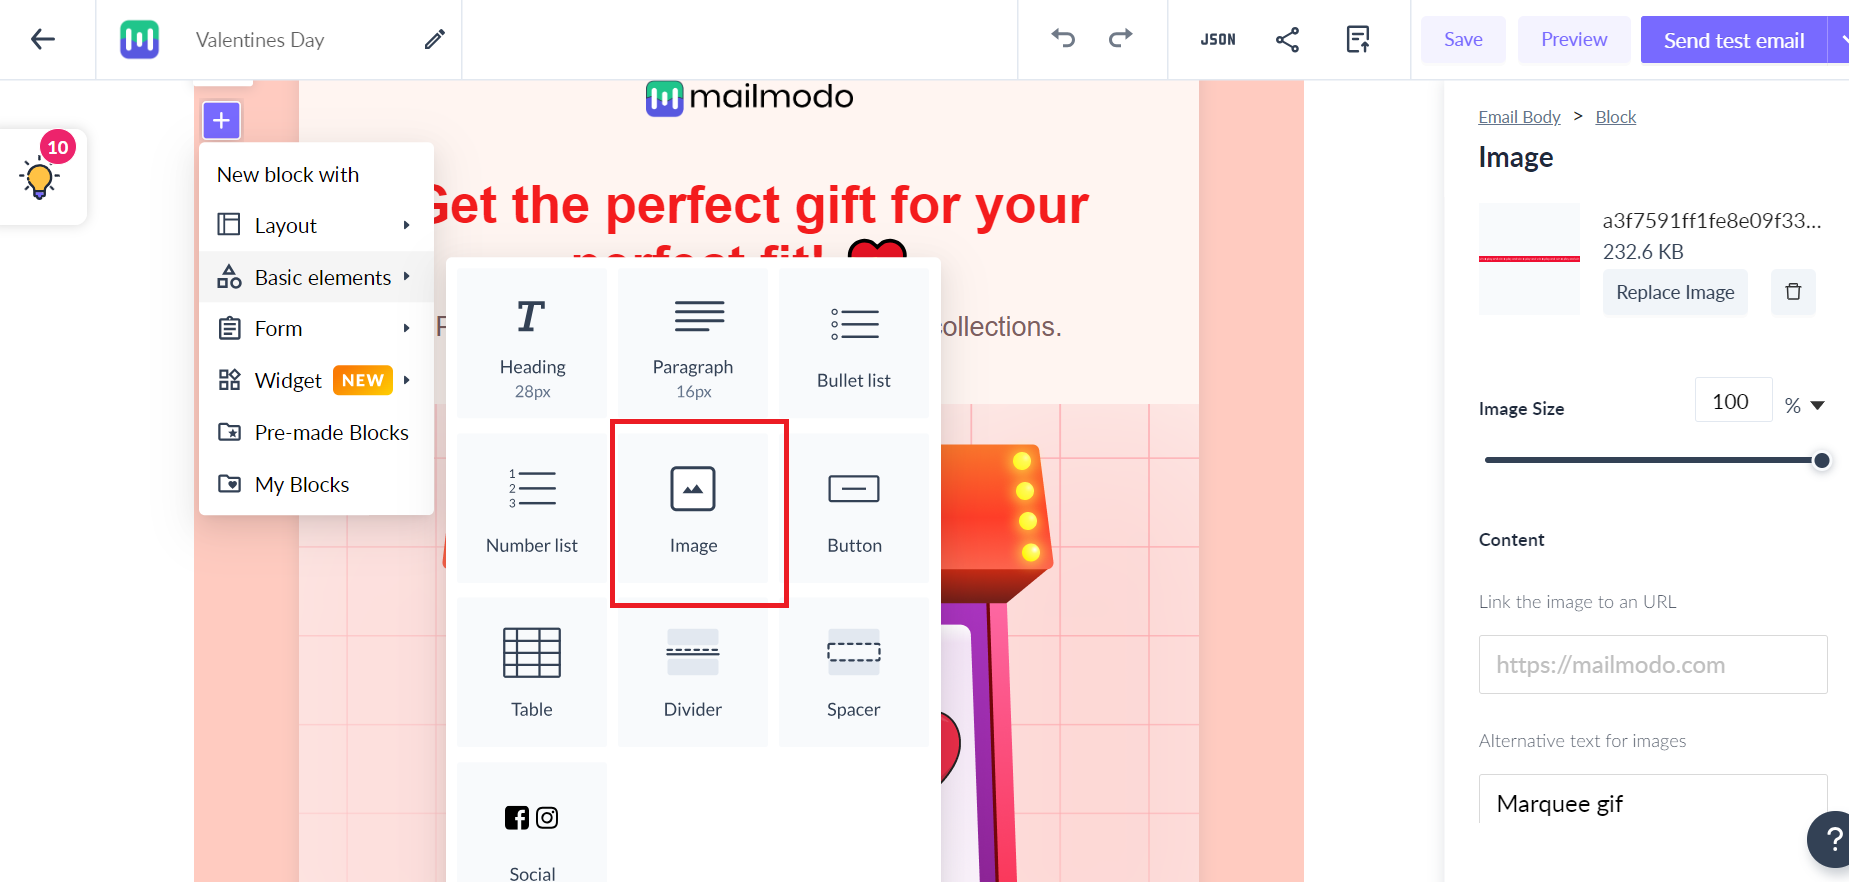 How to add a video thumbnail to a template in Mailmodo?